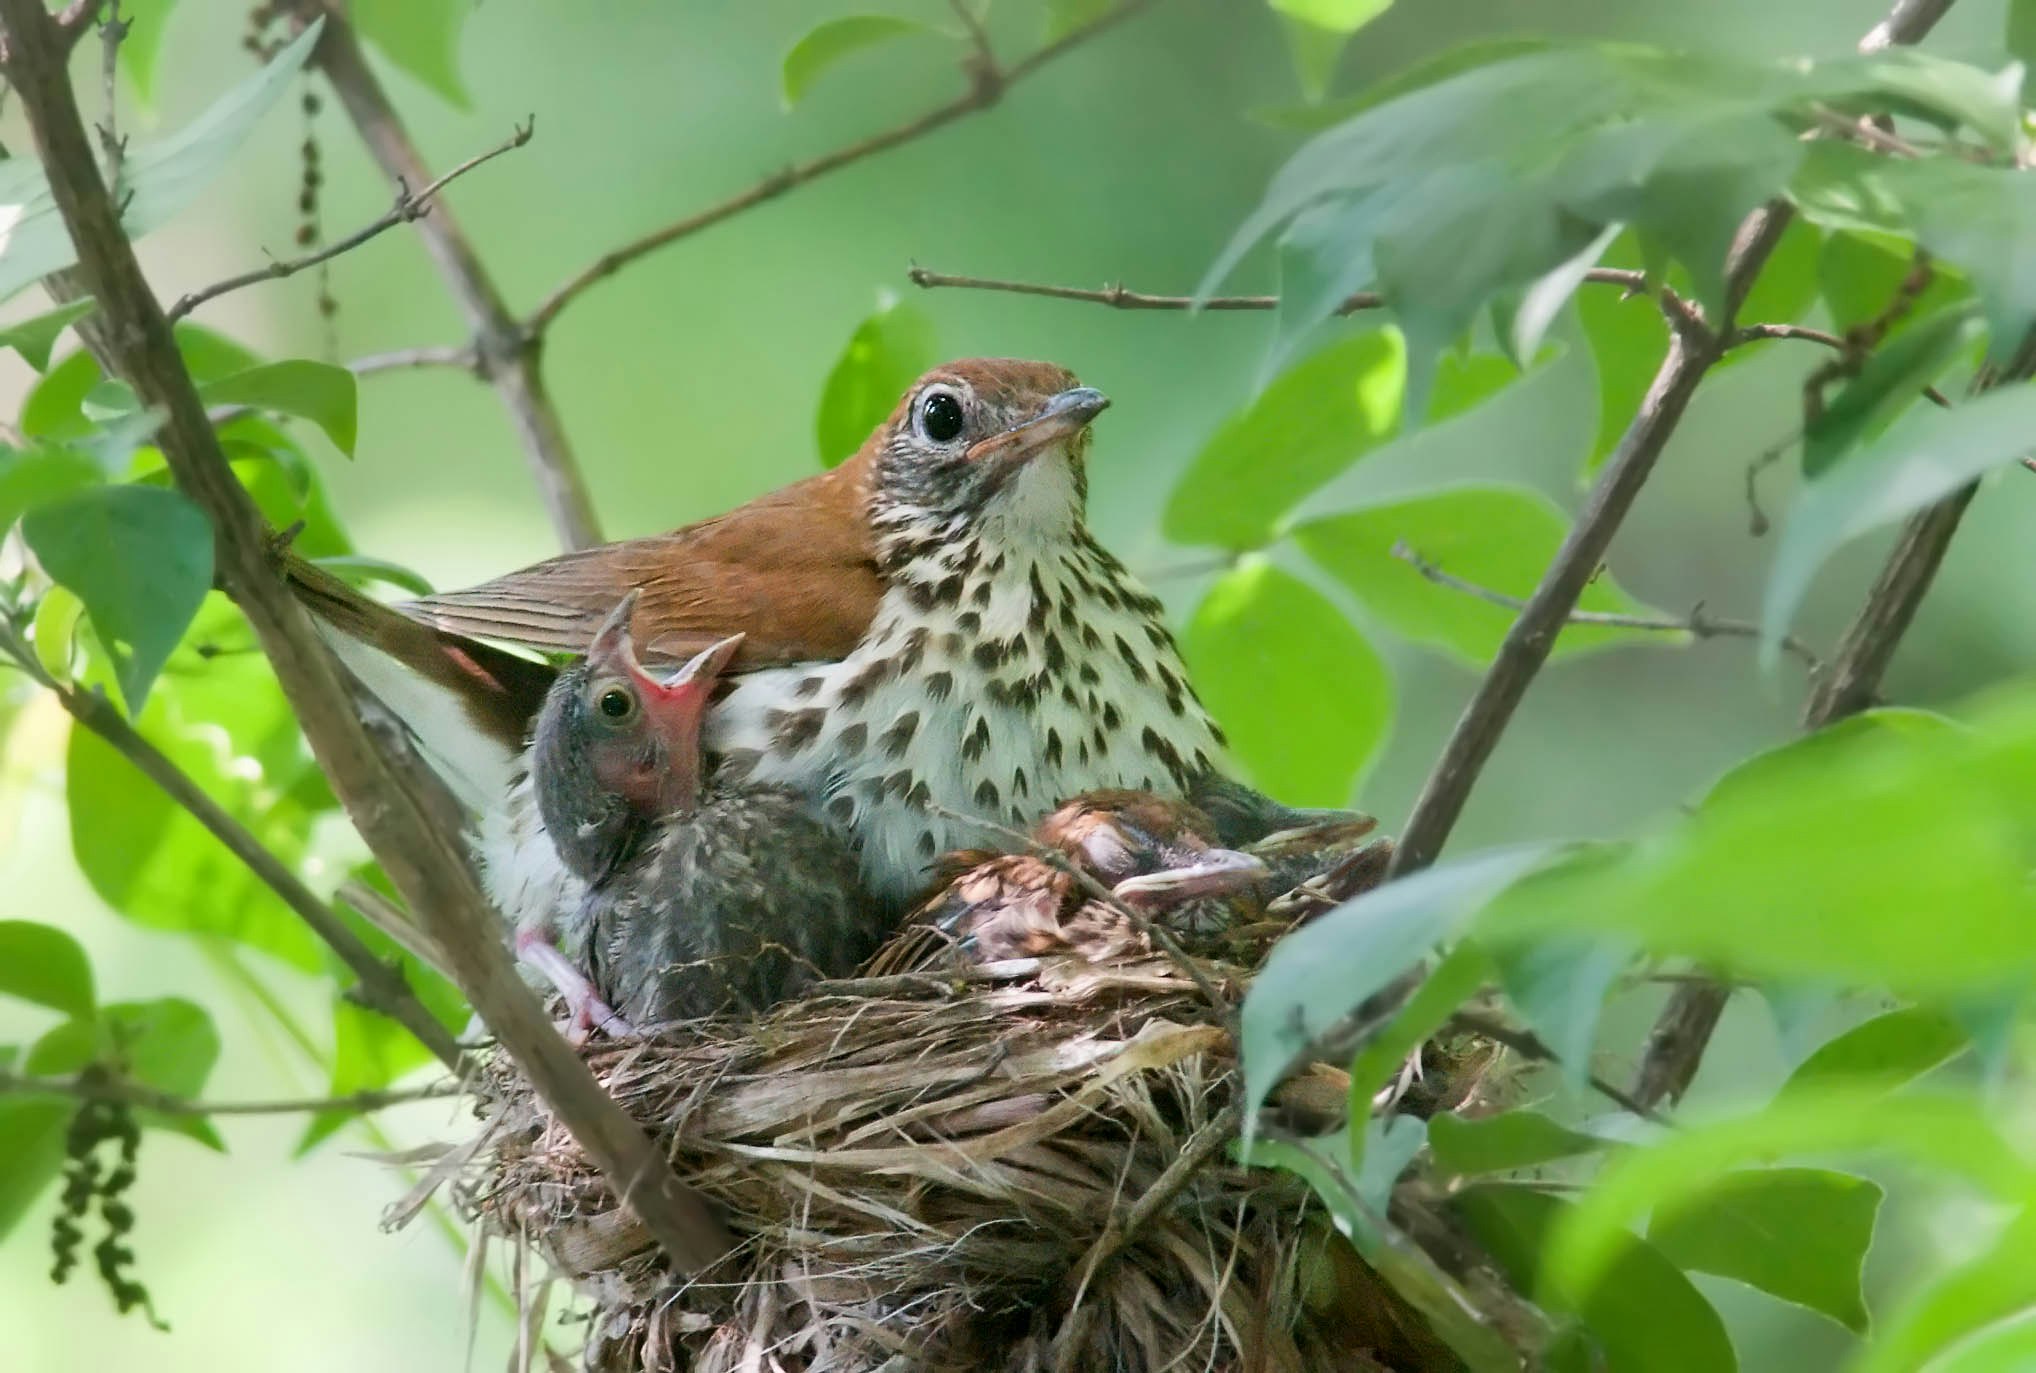 A wood thrush chick next to a much larger cowbird chick, parasitizing its nest